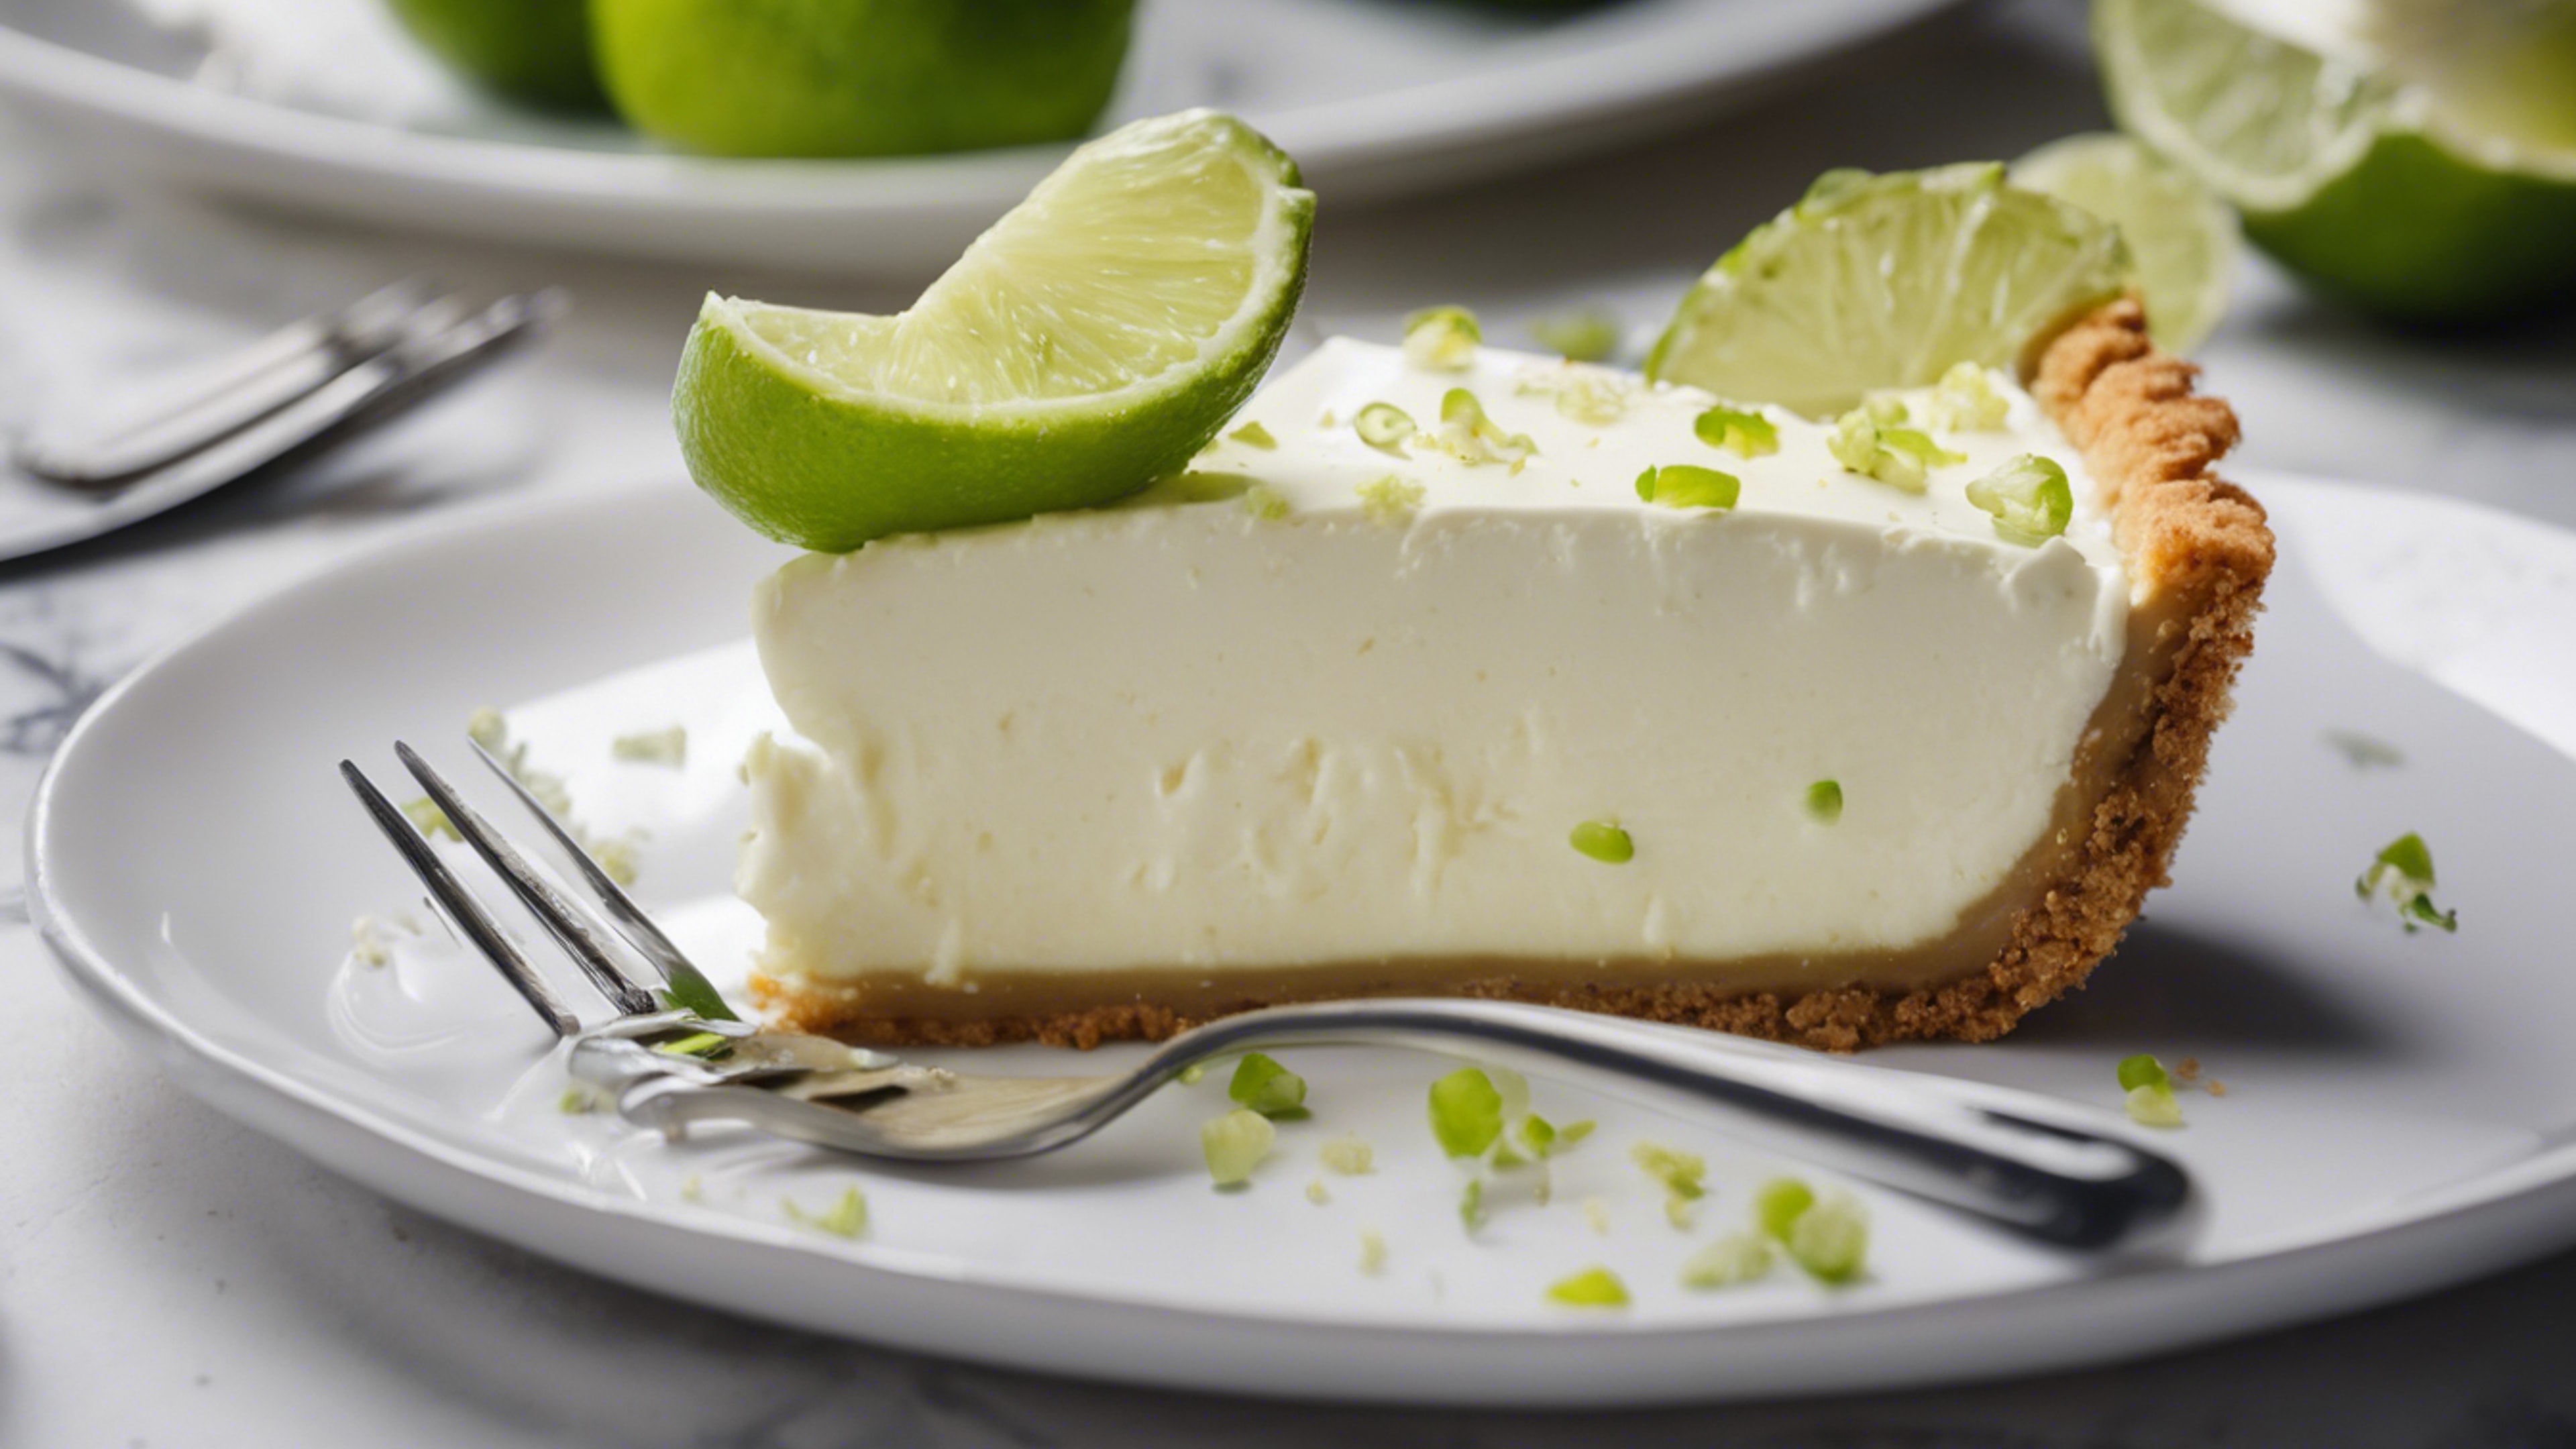 Delicious key lime pie served on a white ceramic plate with a silver fork. Tapeet[dc9d1e1923f243919b66]